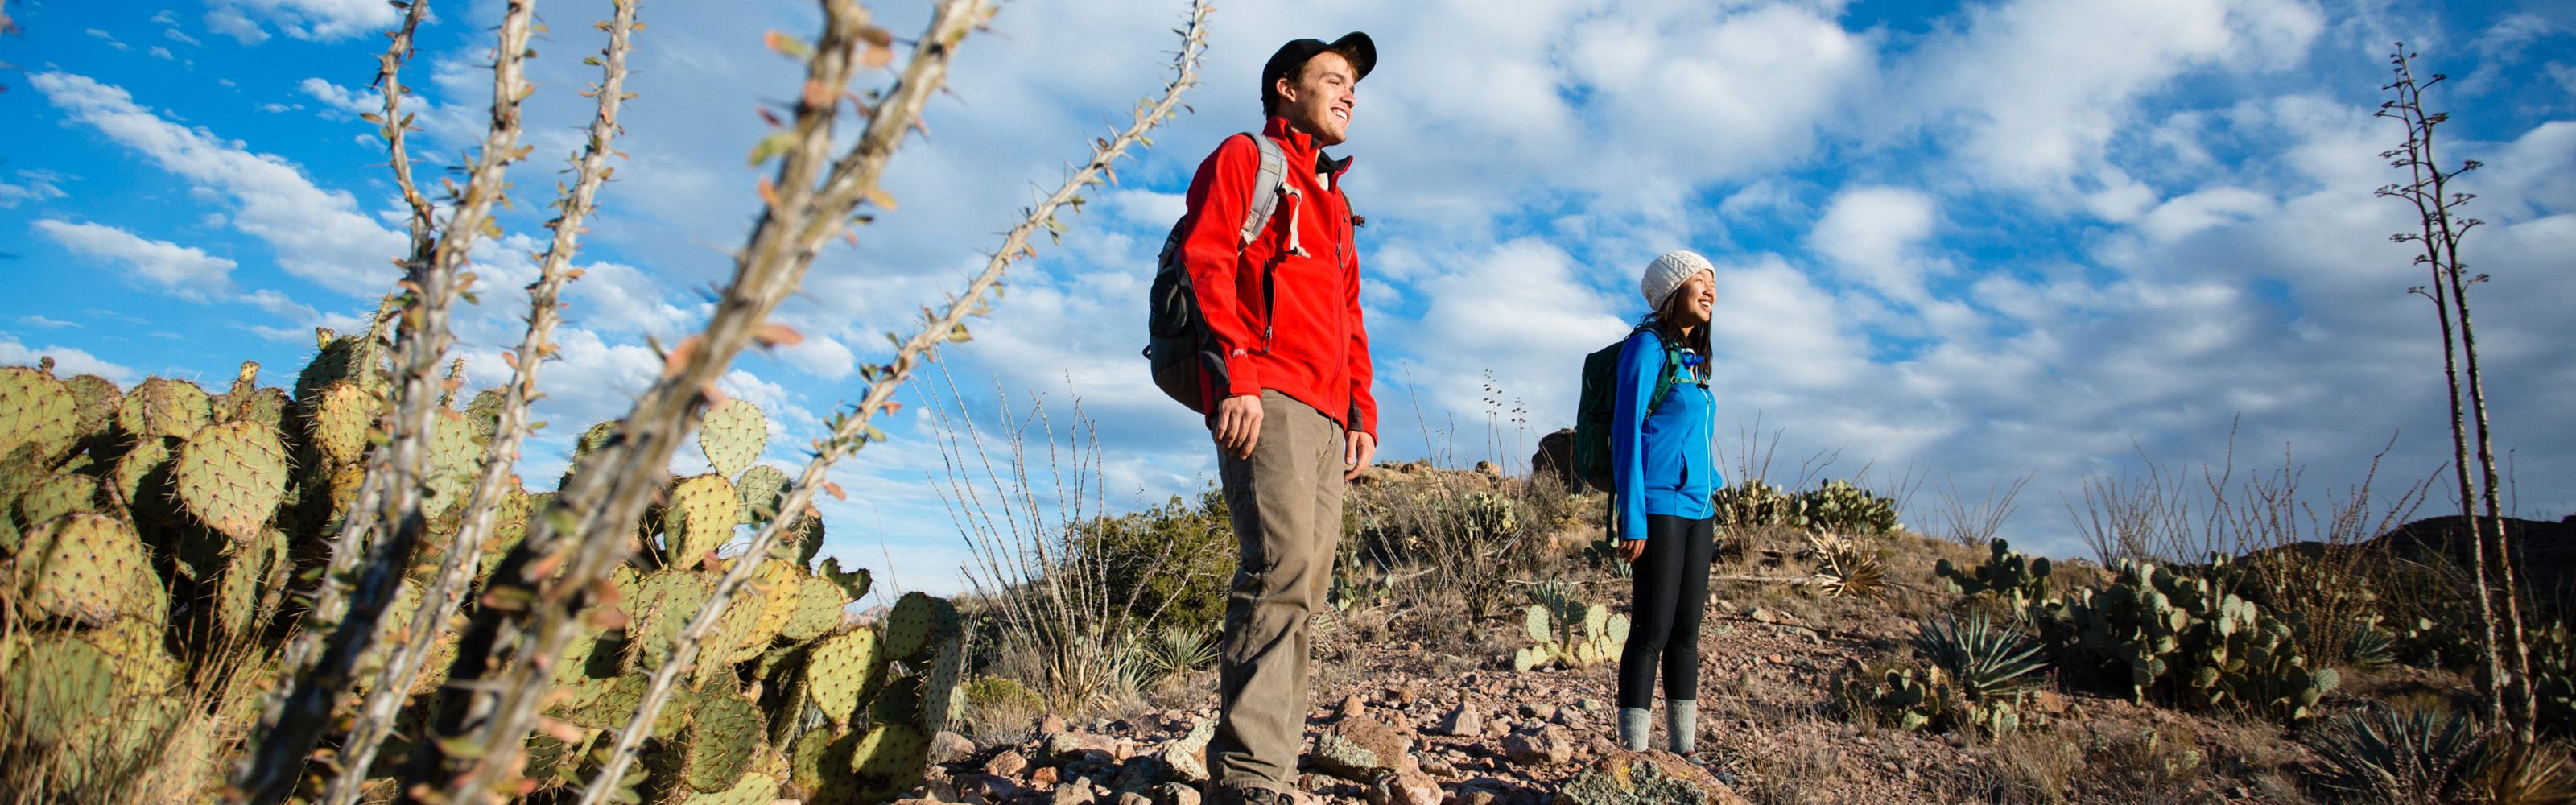 Two smiling people in hiking gear standing in a desert landscape with cactuses in the foreground.